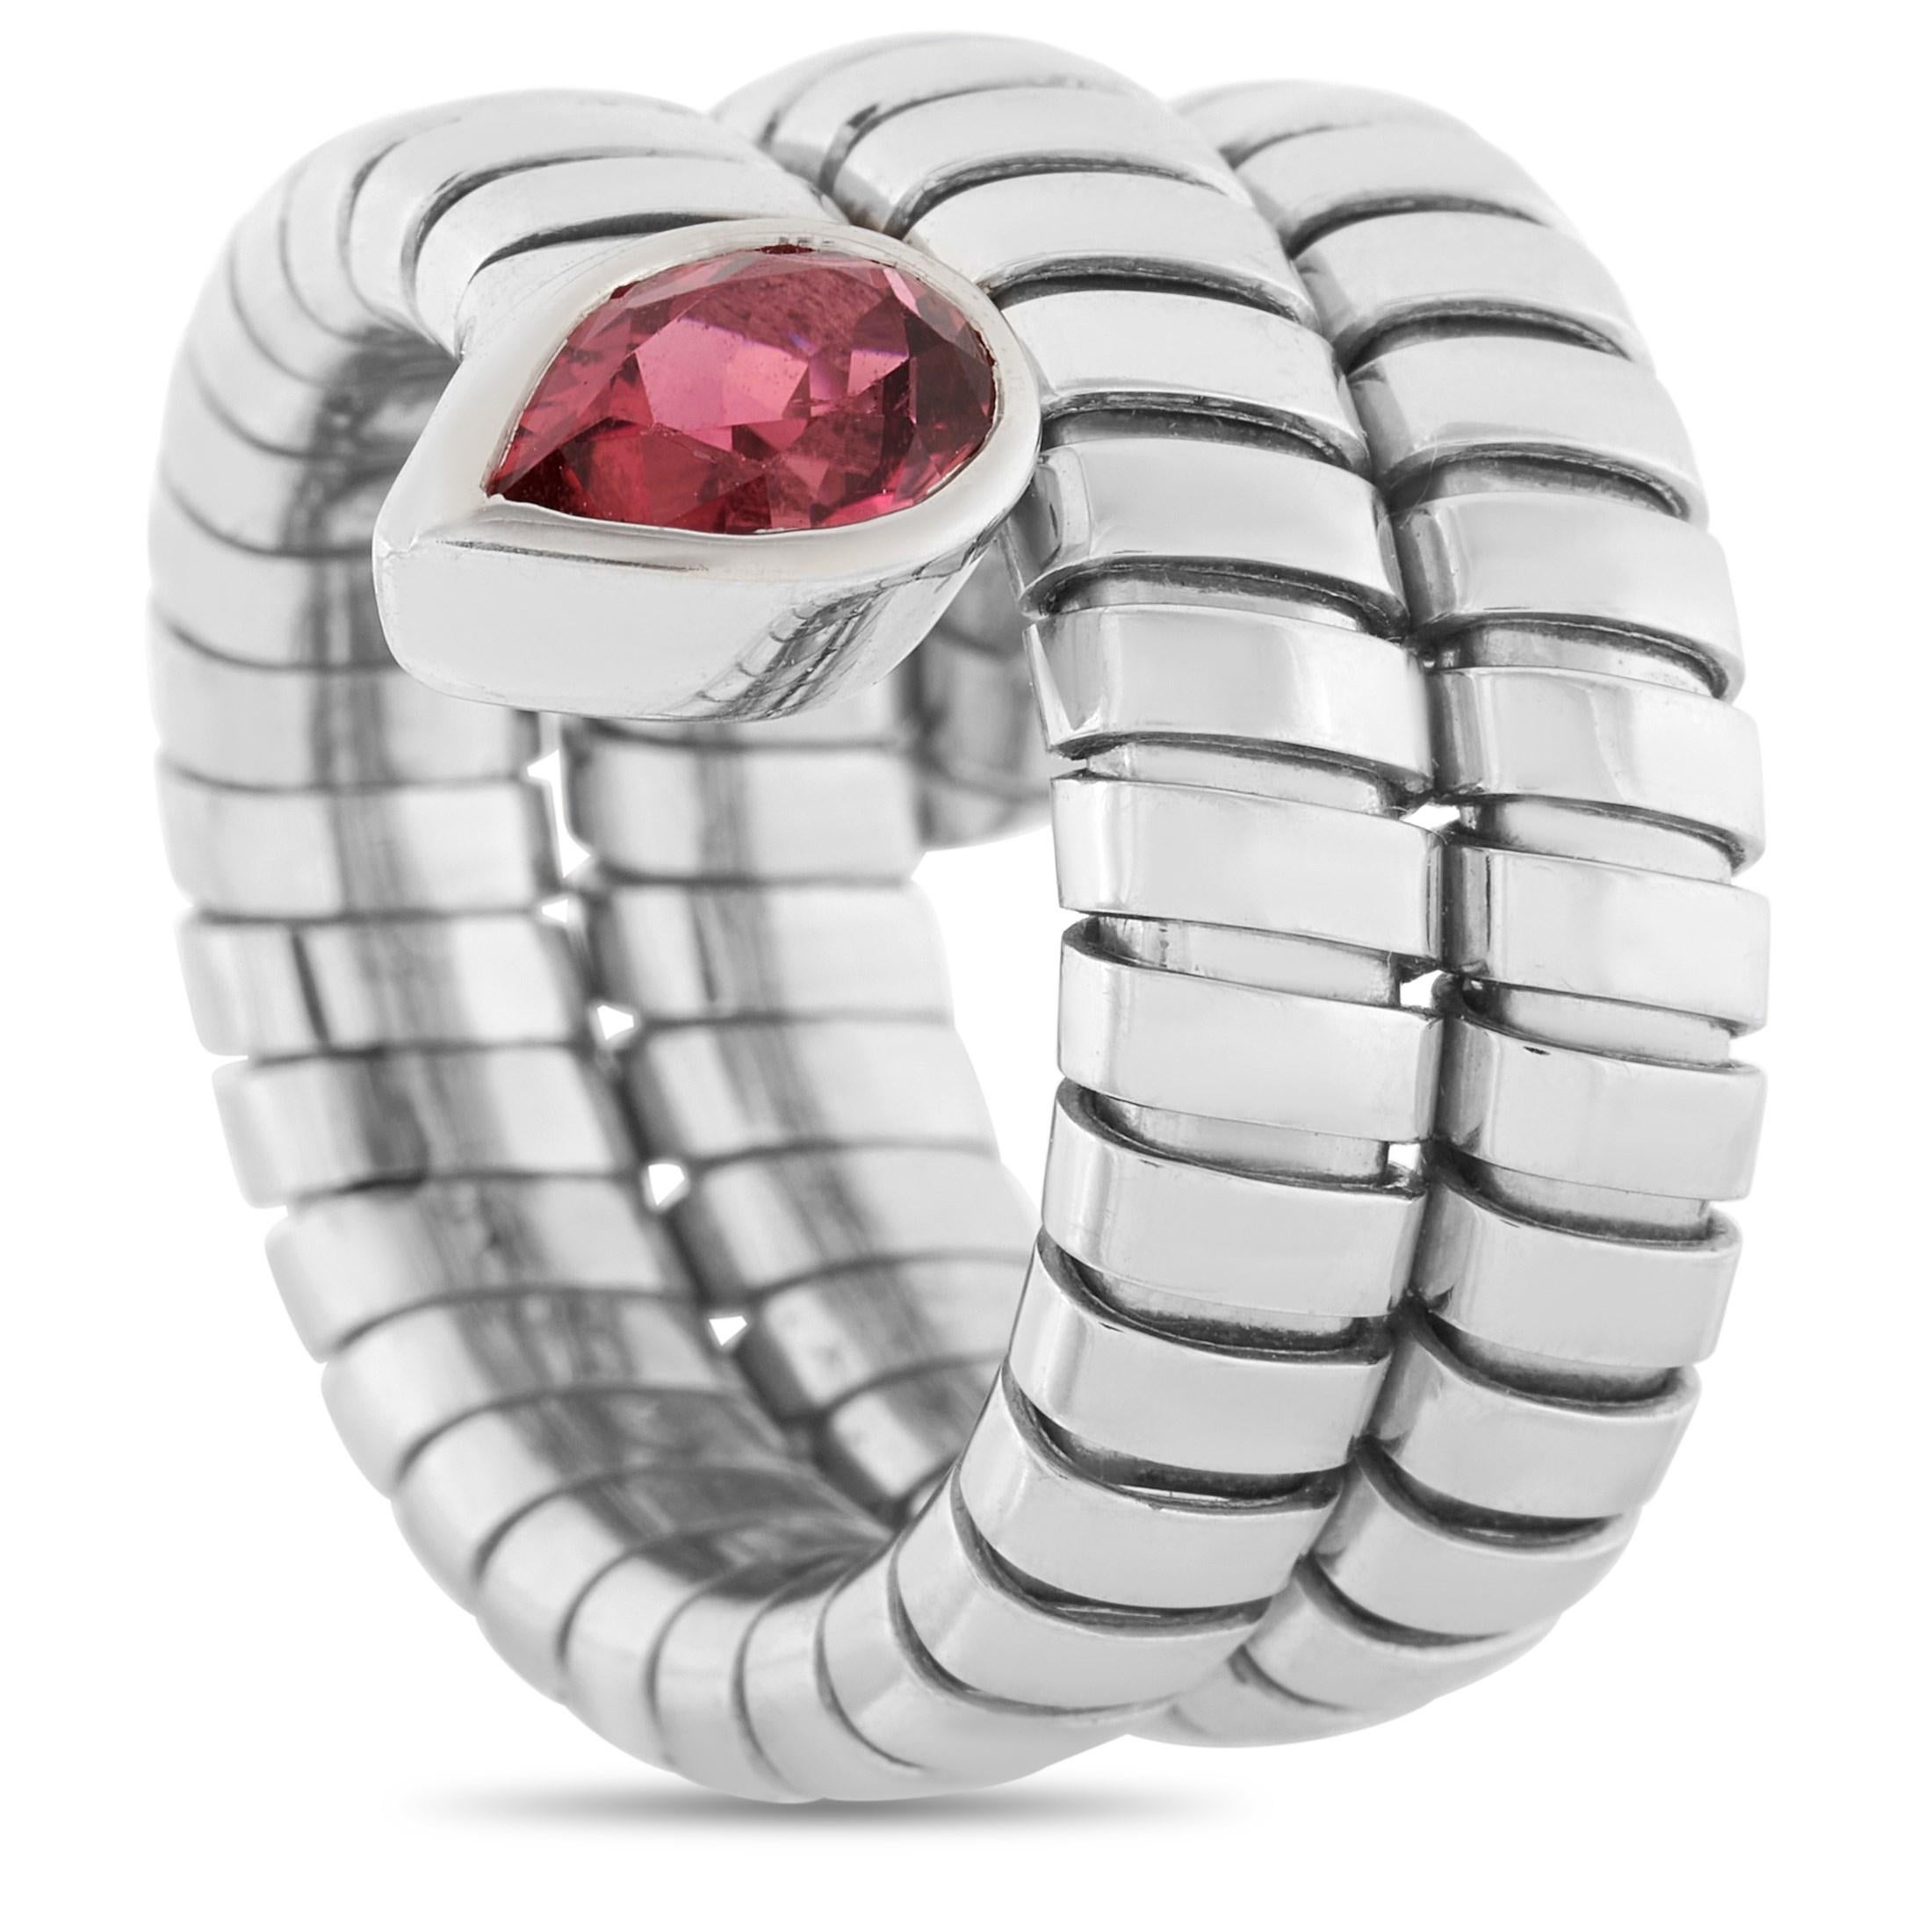 Bold, eye-catching, unique. The Bvlgari Serpenti Tubogas 18K White Gold Tourmaline Snake Ring ticks all the boxes for a statement ring. The 19mm thick band features a shapely coil of white gold rings dotted at one end with a pear-shaped pink